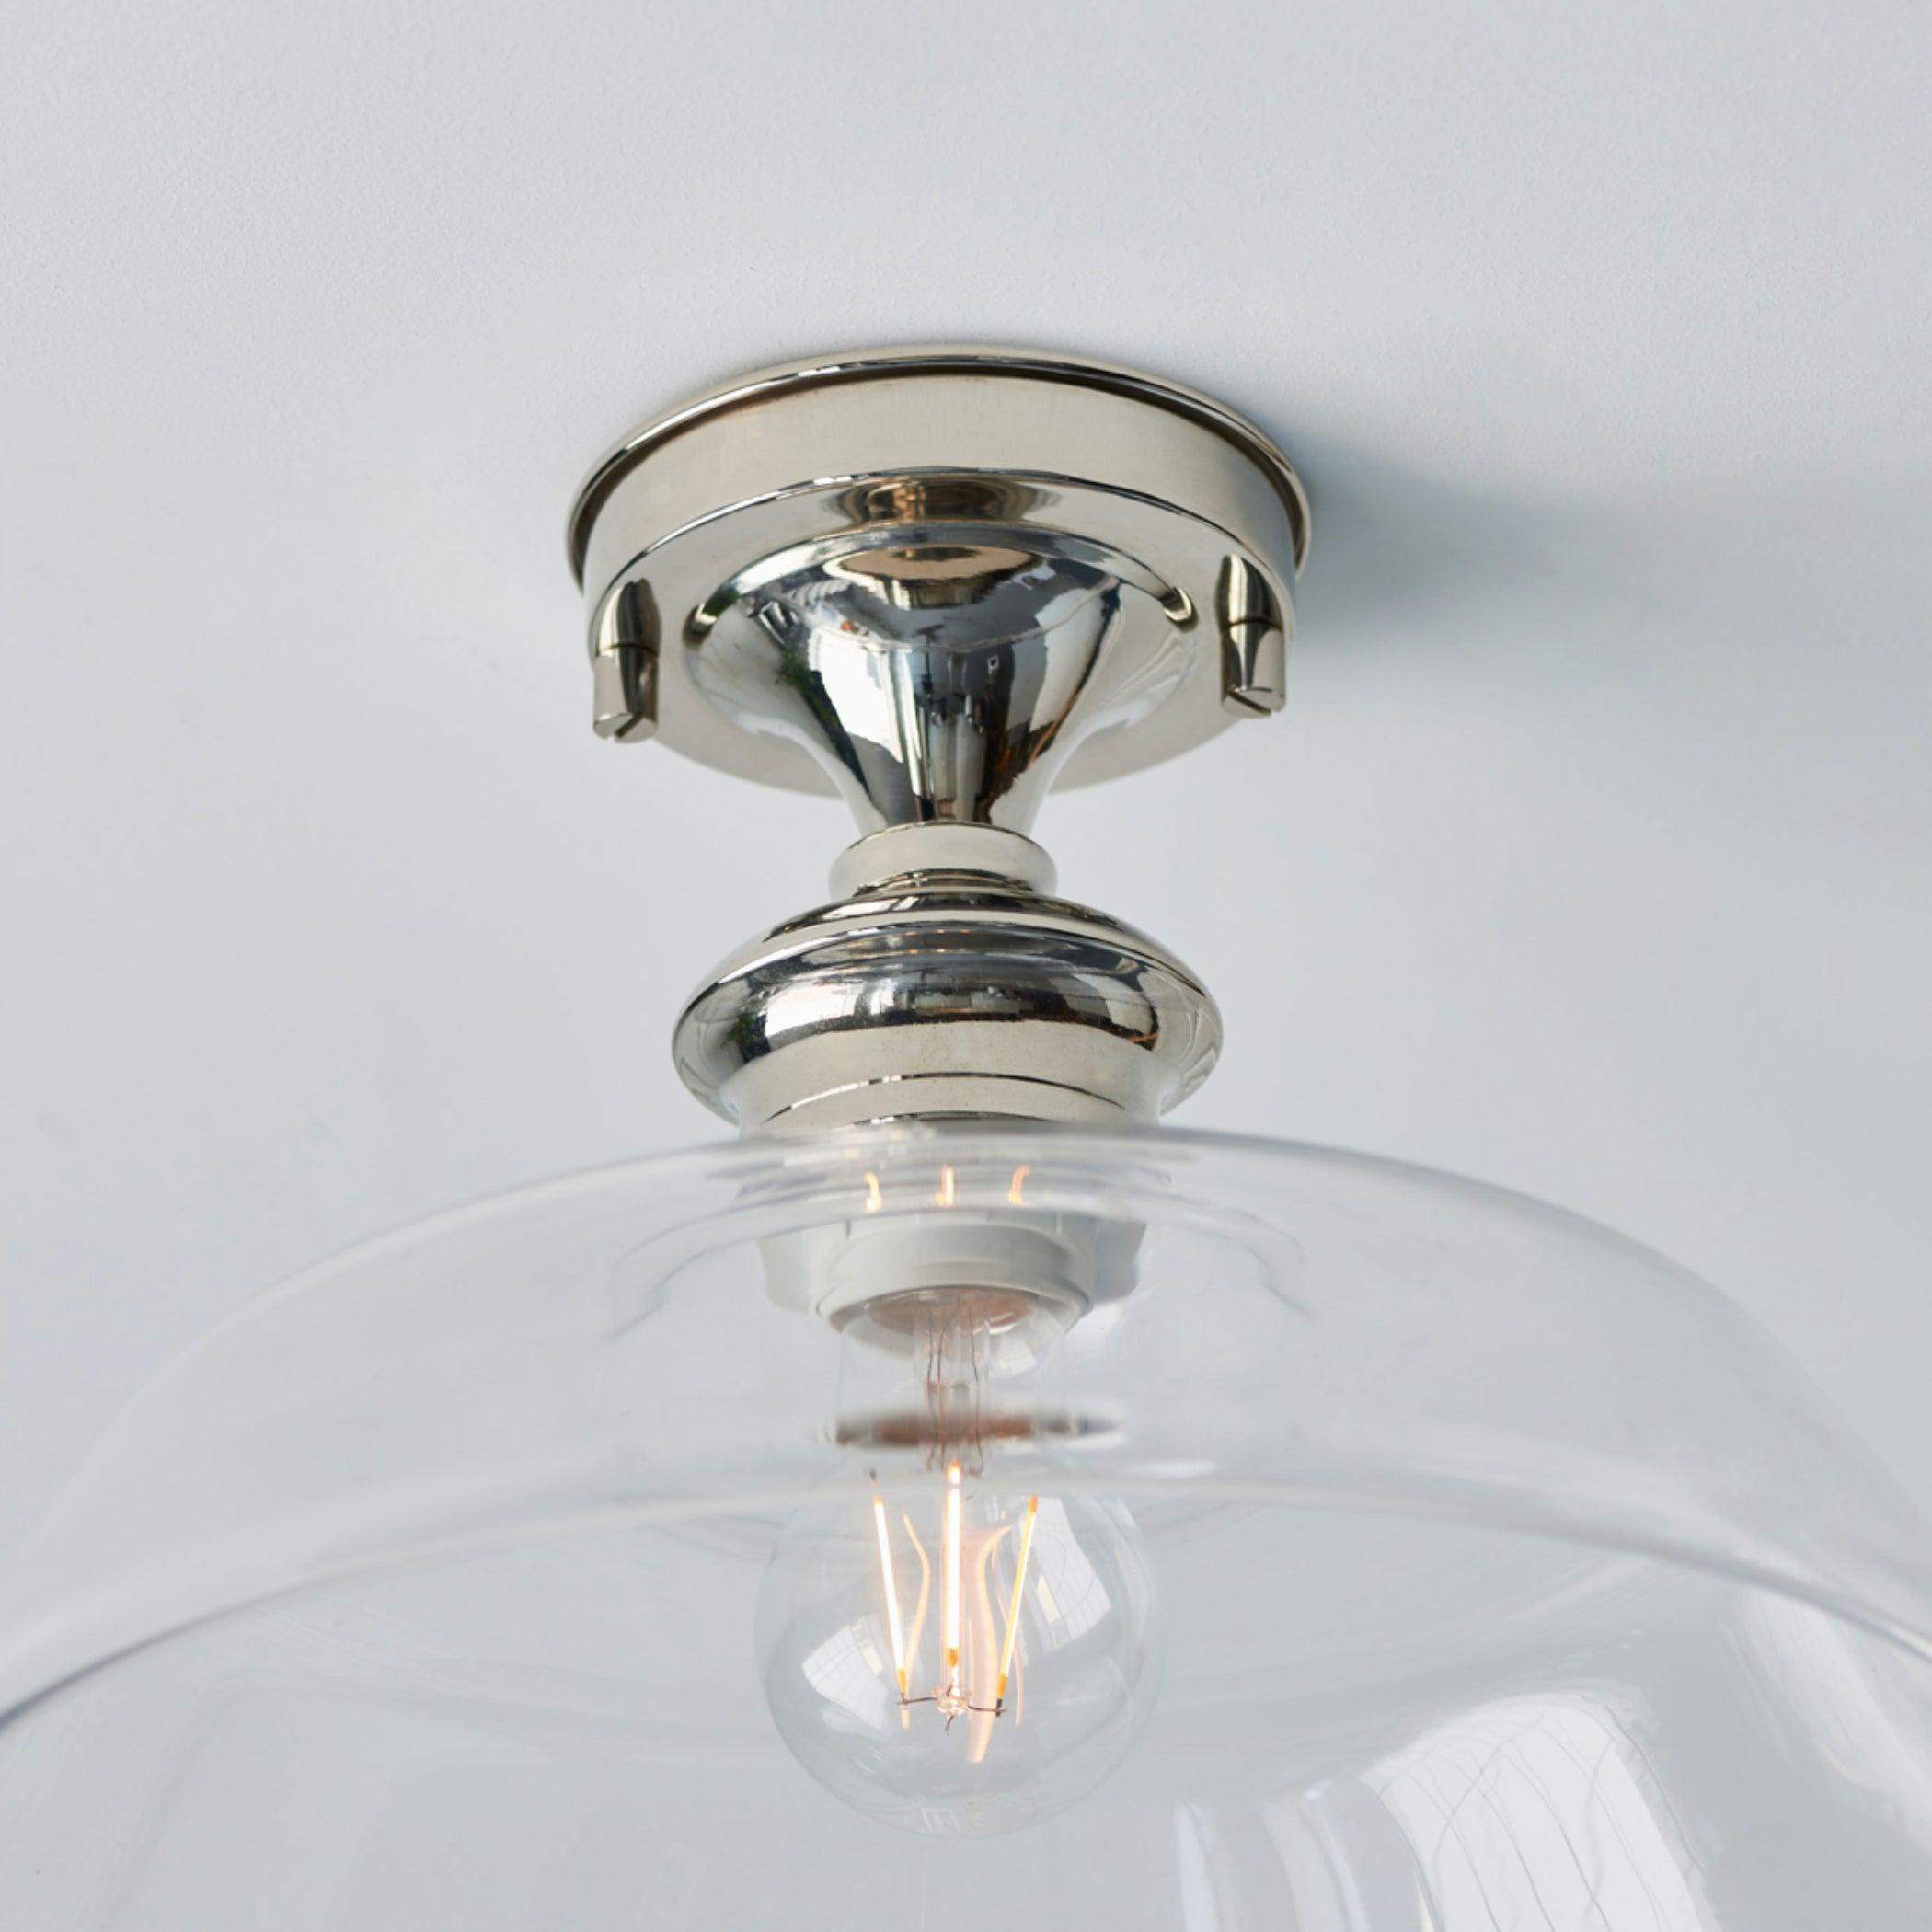 Nickel and Glass Dorset Ceiling Light